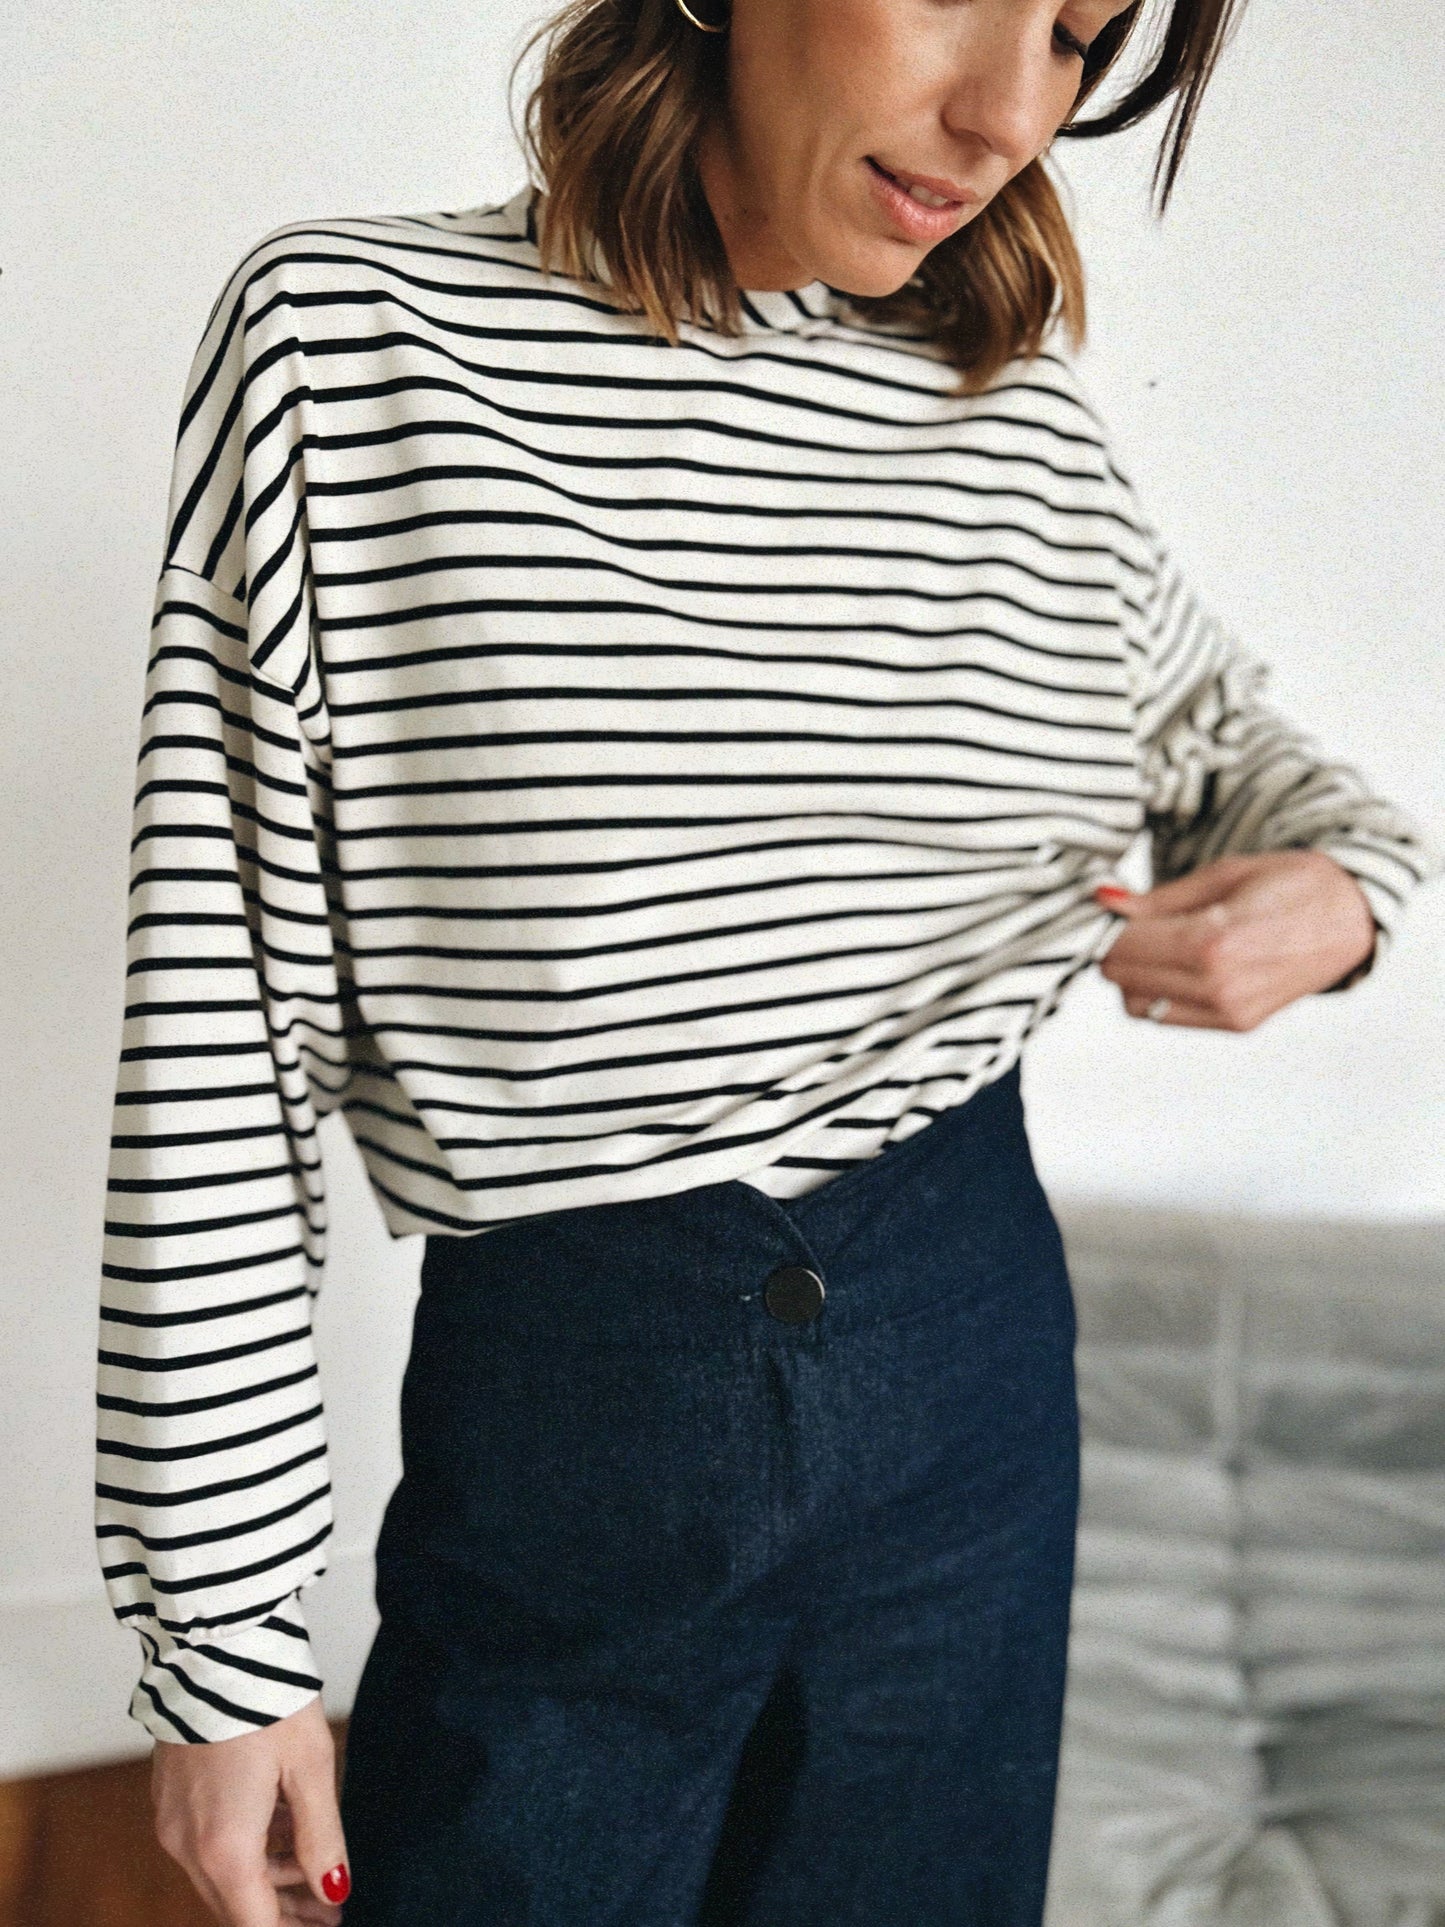 The Ginette striped sweater